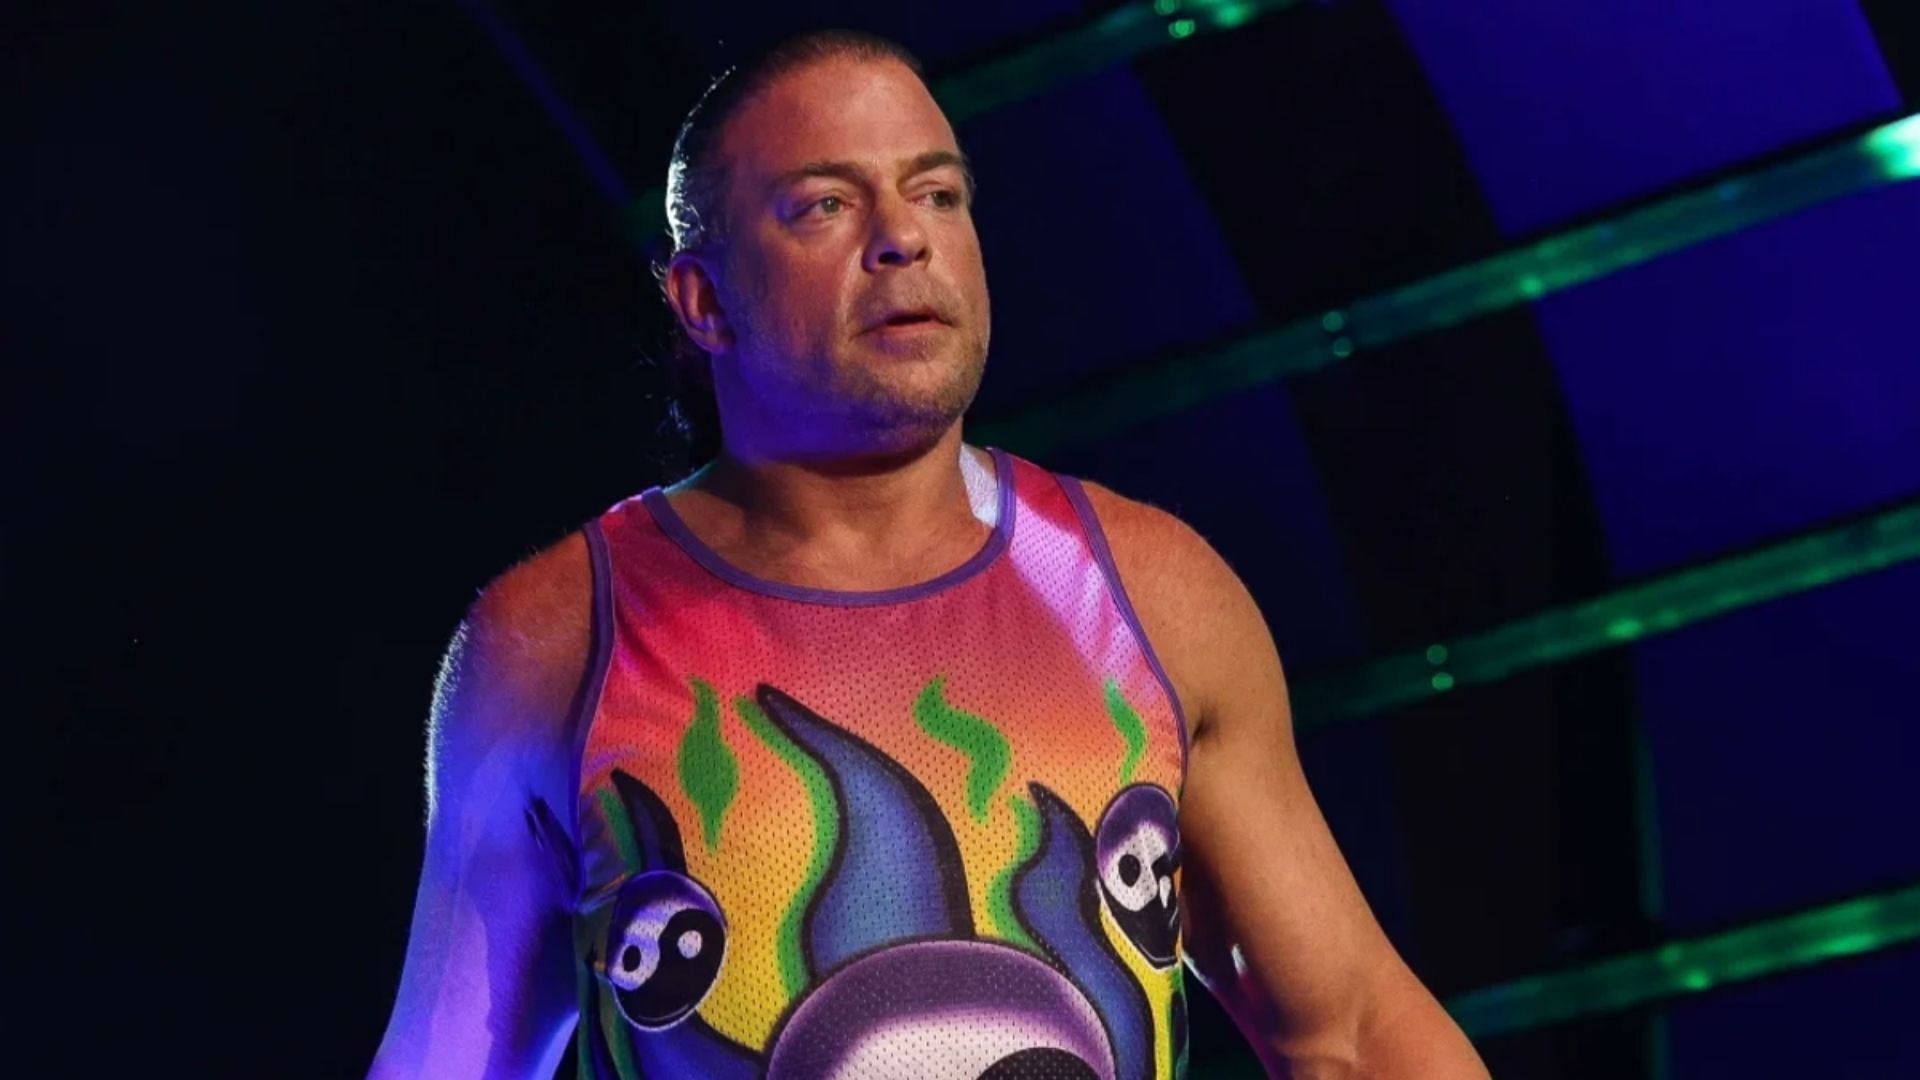 Rob Van Dam made his AEW debut on the latest episode of Dynamite.